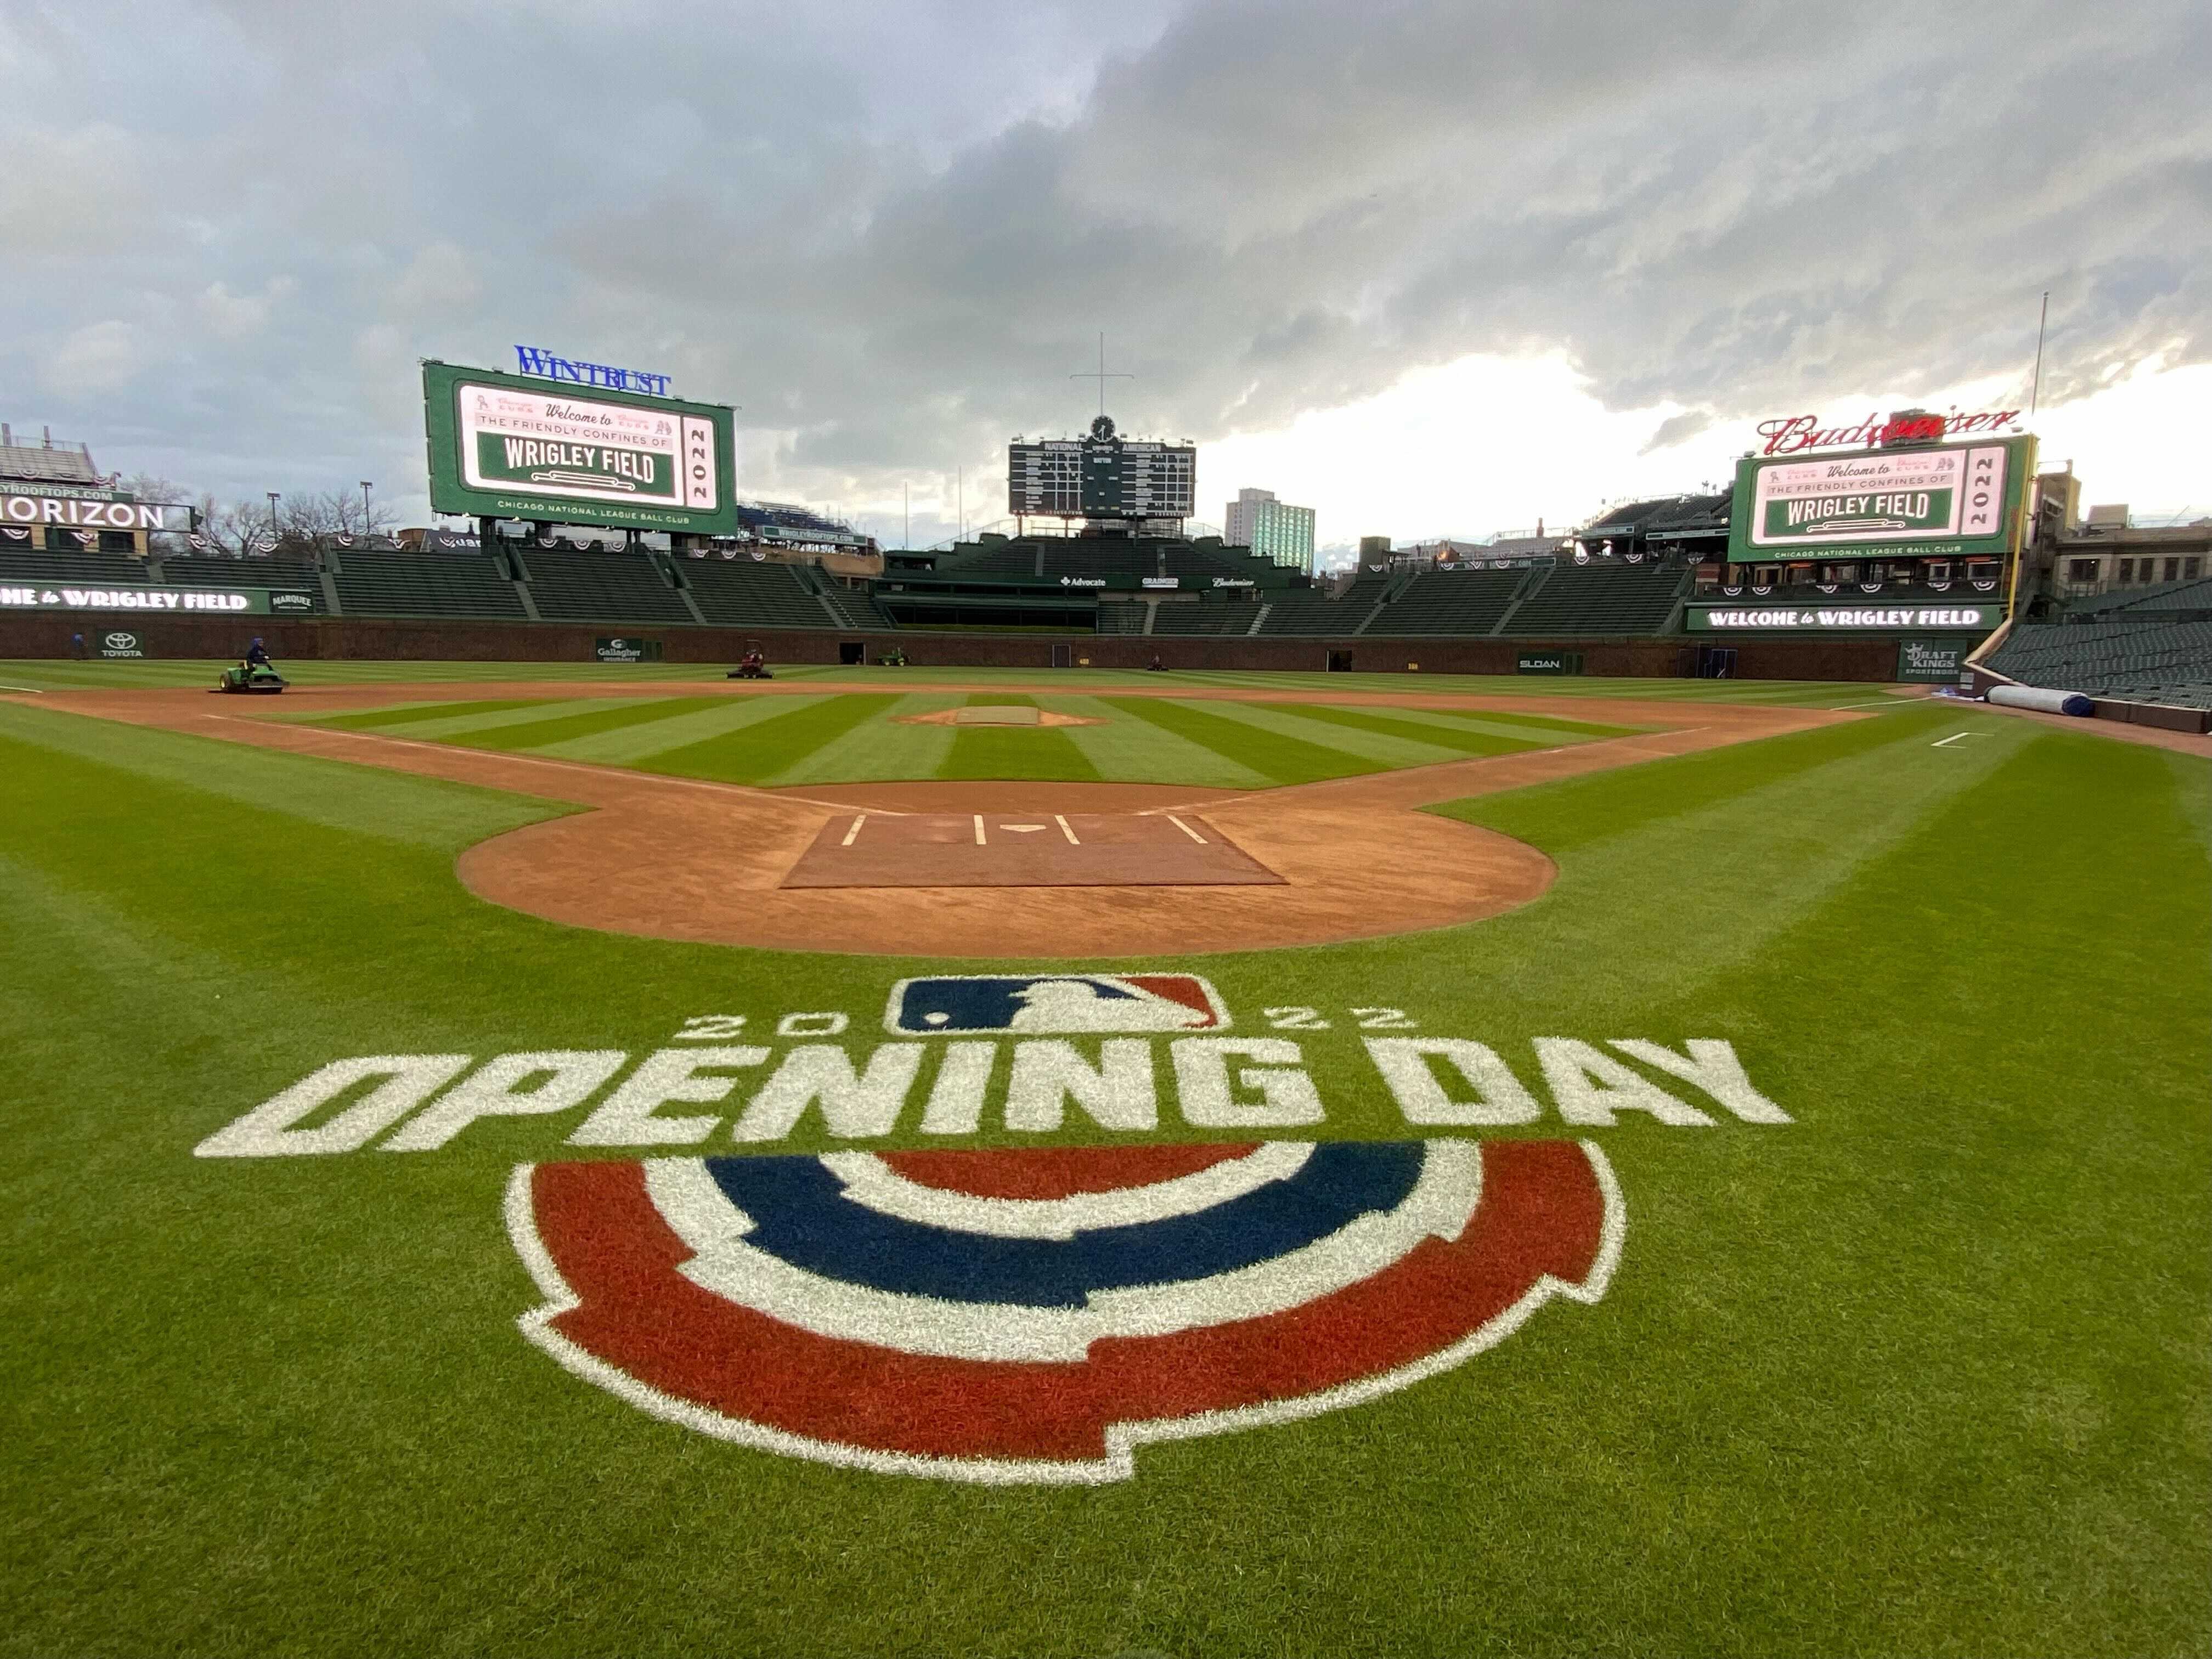 Cubs Opening Day: Revamped Wrigley Field welcomes fans for 101st